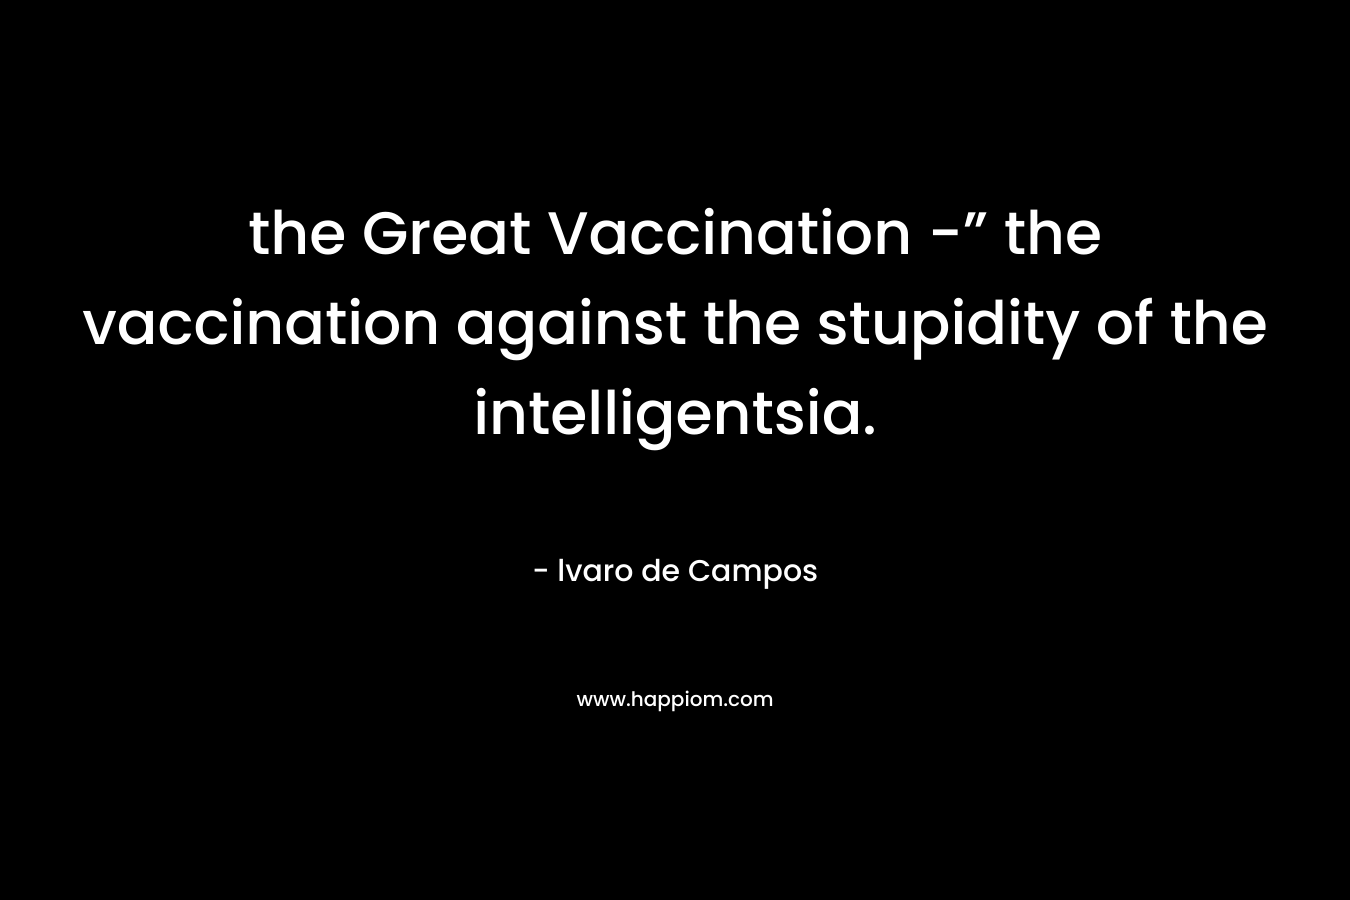 the Great Vaccination -” the vaccination against the stupidity of the intelligentsia. – lvaro de Campos